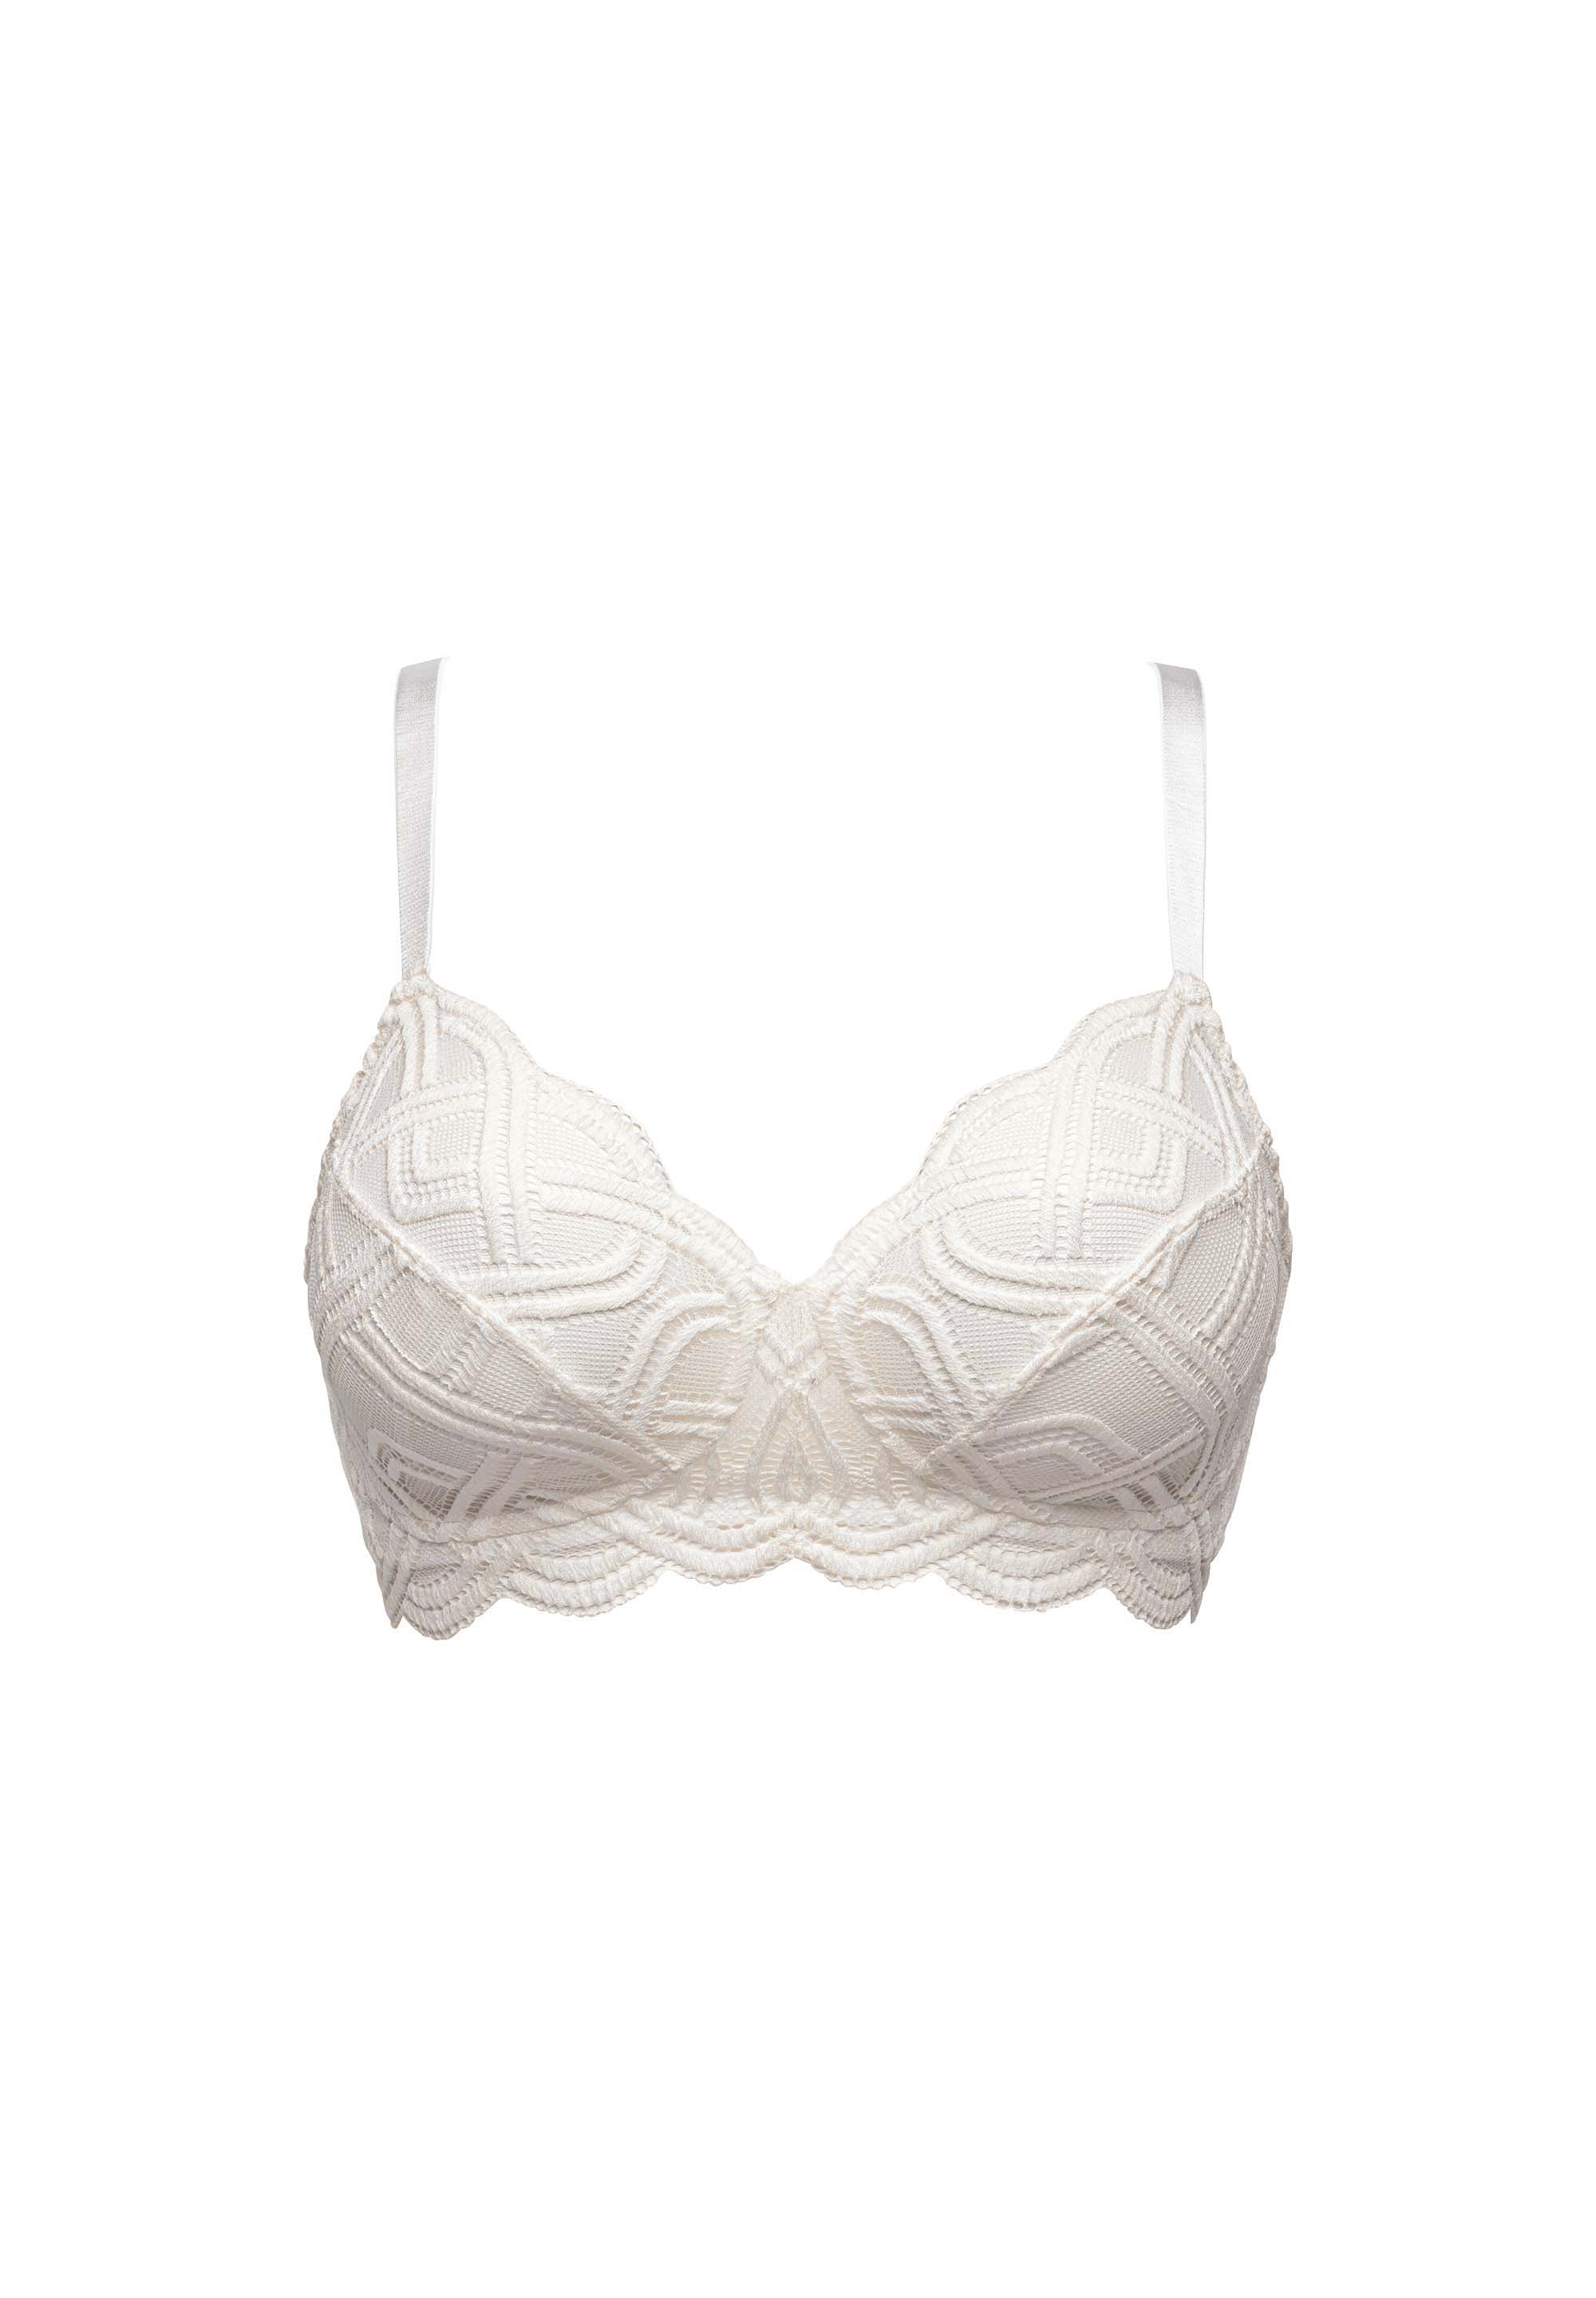 Elise Ivory underwired full cup bra